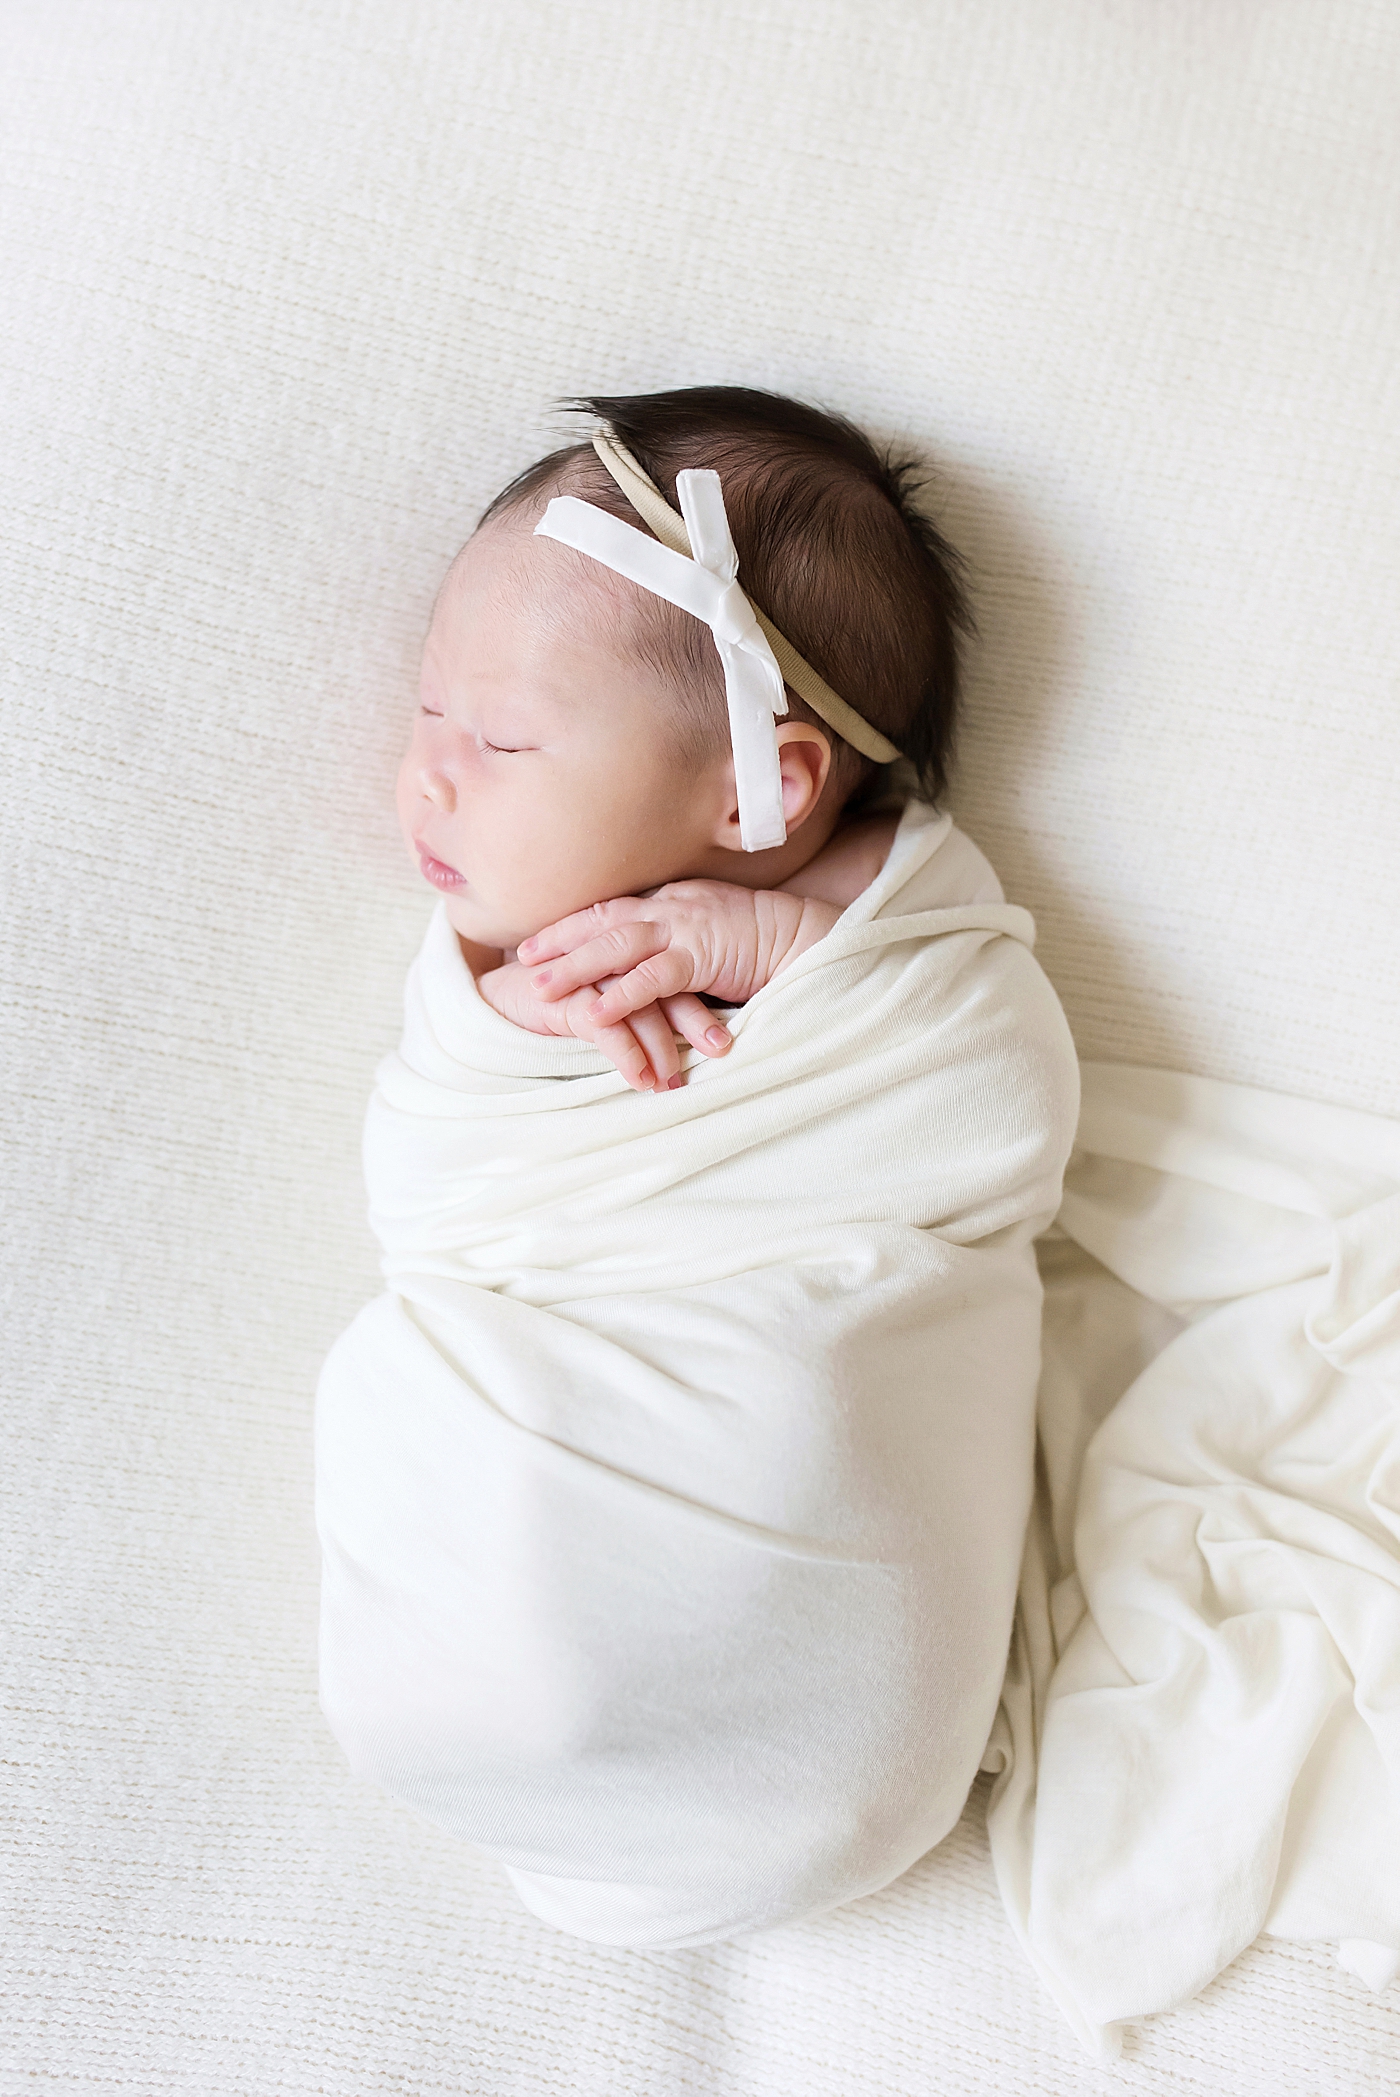 Baby girl wrapped in a white swaddle with a bow headband | Photo by Anna Wisjo Photography